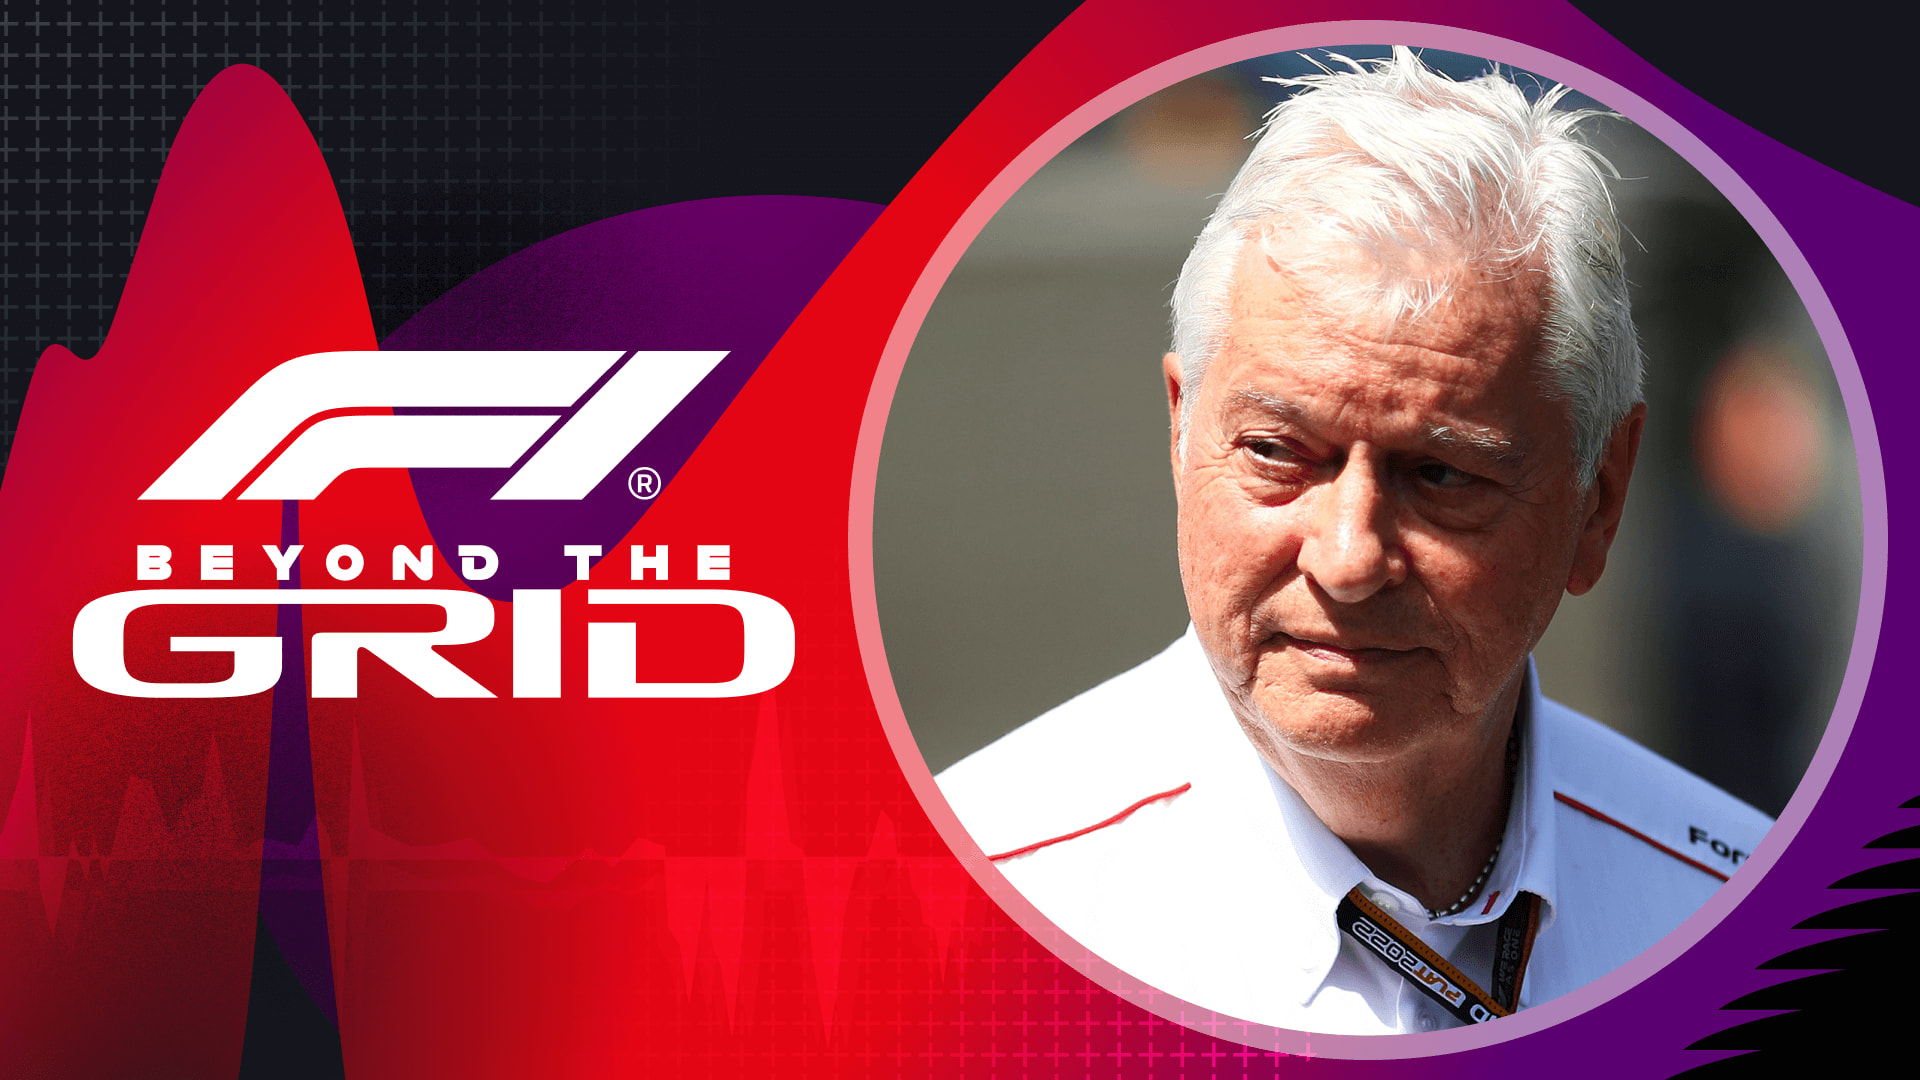 BEYOND THE GRID: Pat Symonds on working with Senna and Schumacher, achieving title glory and F1’s exciting future